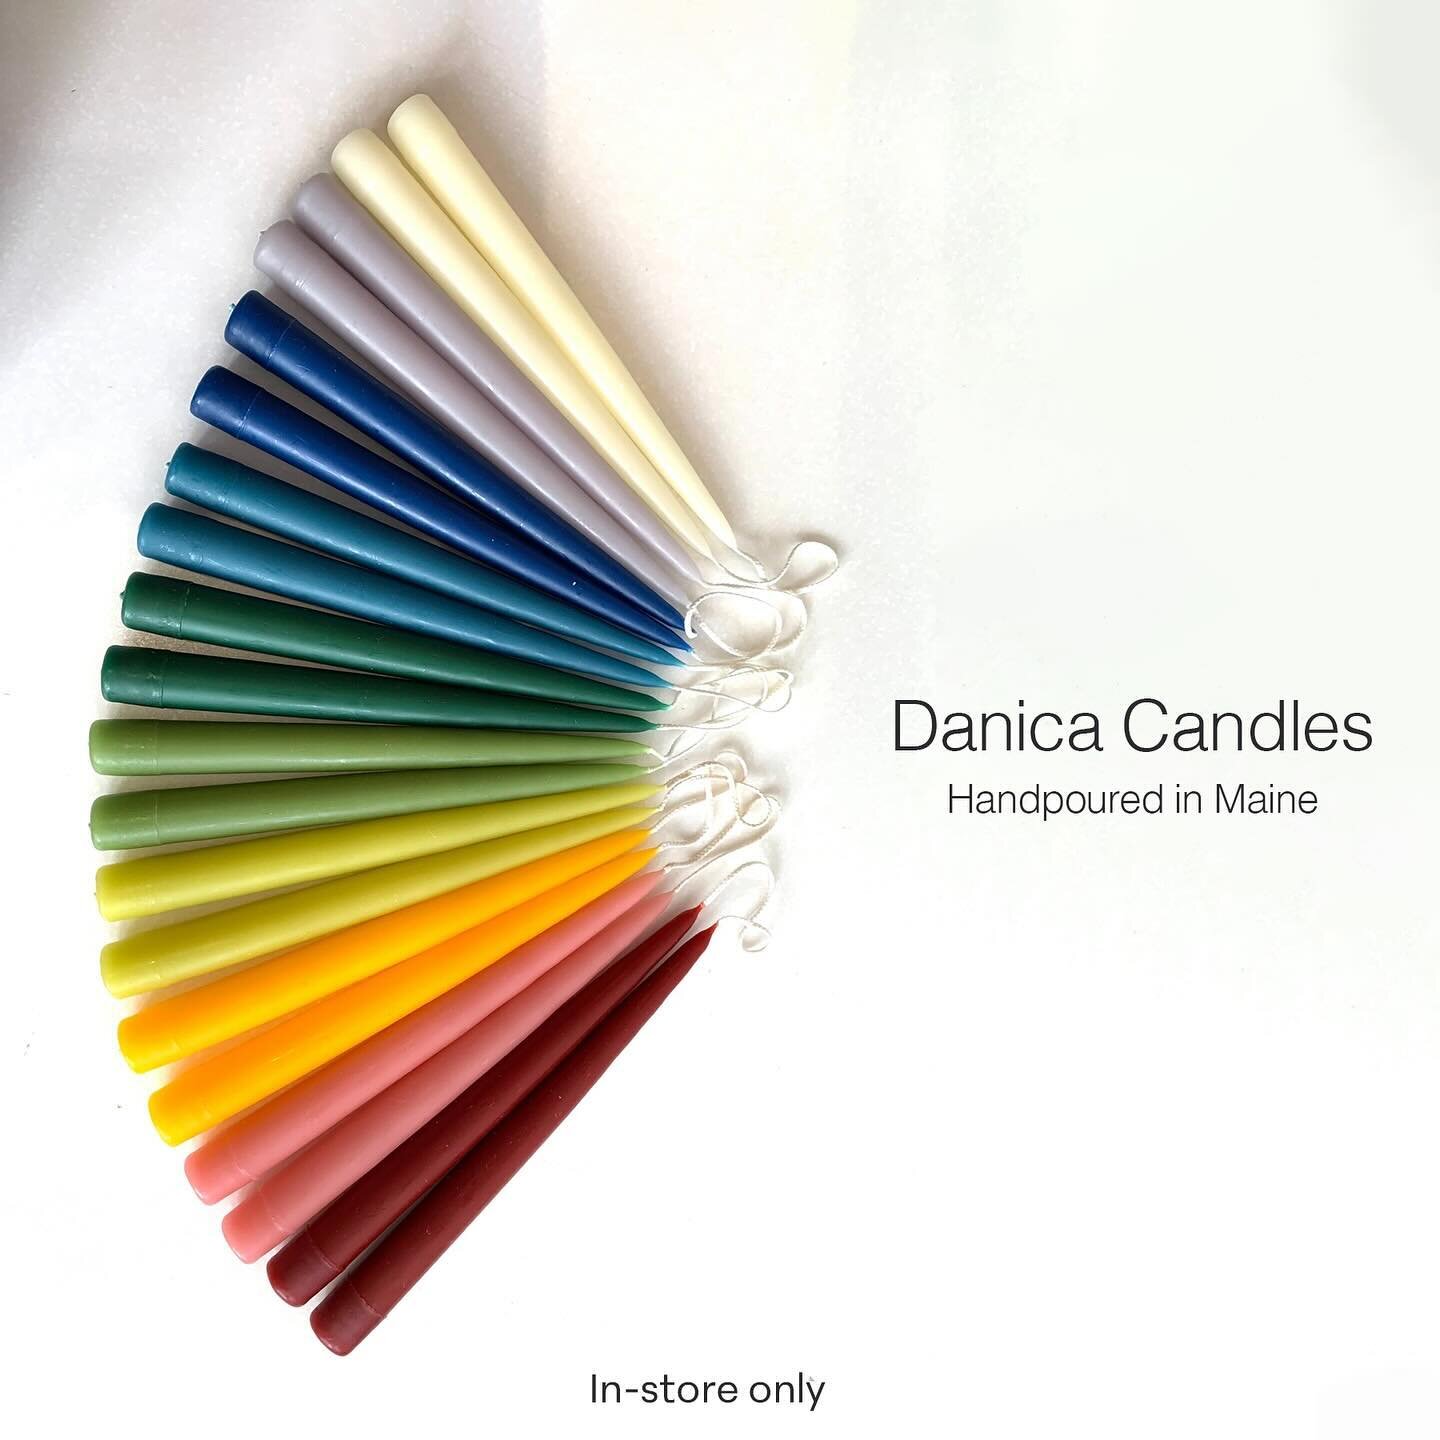 Danica Design creates hand-poured dripless tapered candles in today&rsquo;s color palettes. In-store only. #nyc #uws #danicadesigncandles #poetryofmaterialthings